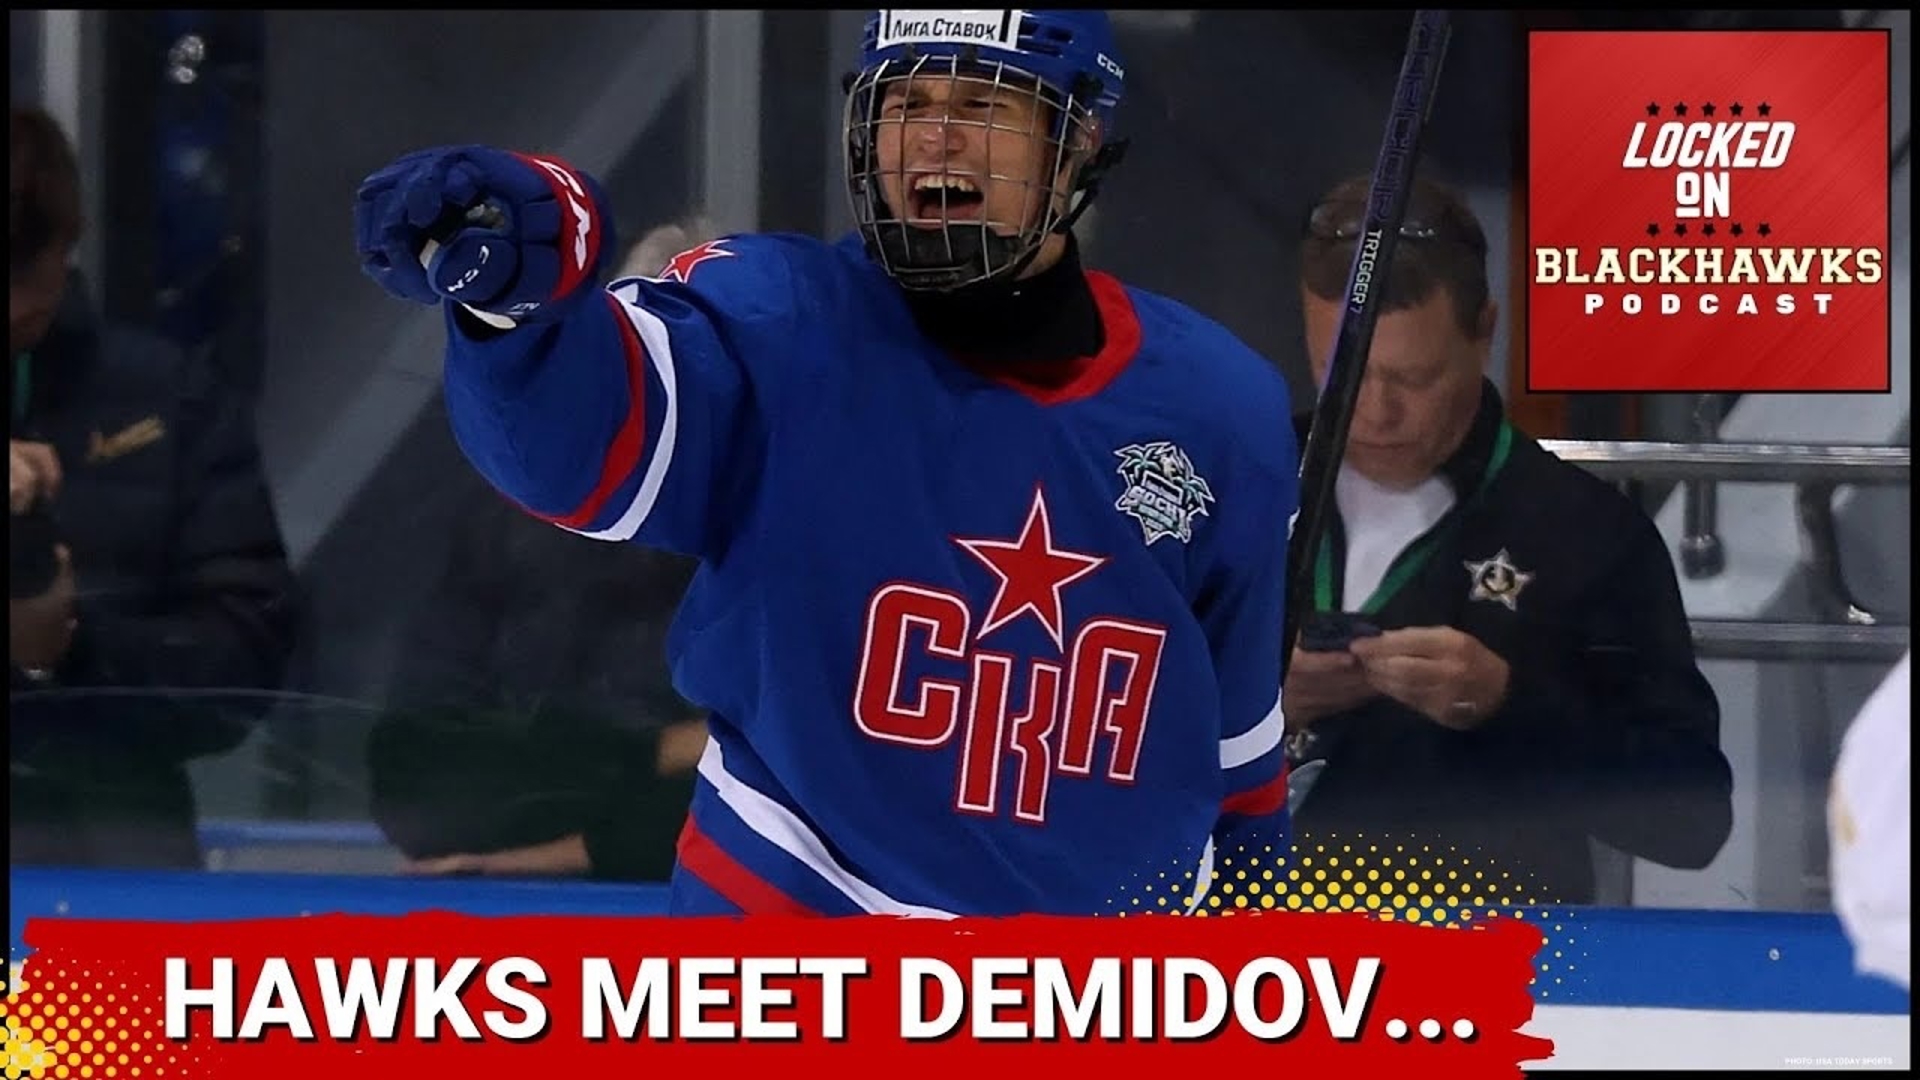 Wednesday's episode begins with a discussion on Ivan Demidov arriving in the United States ahead of the 2024 NHL Draft!